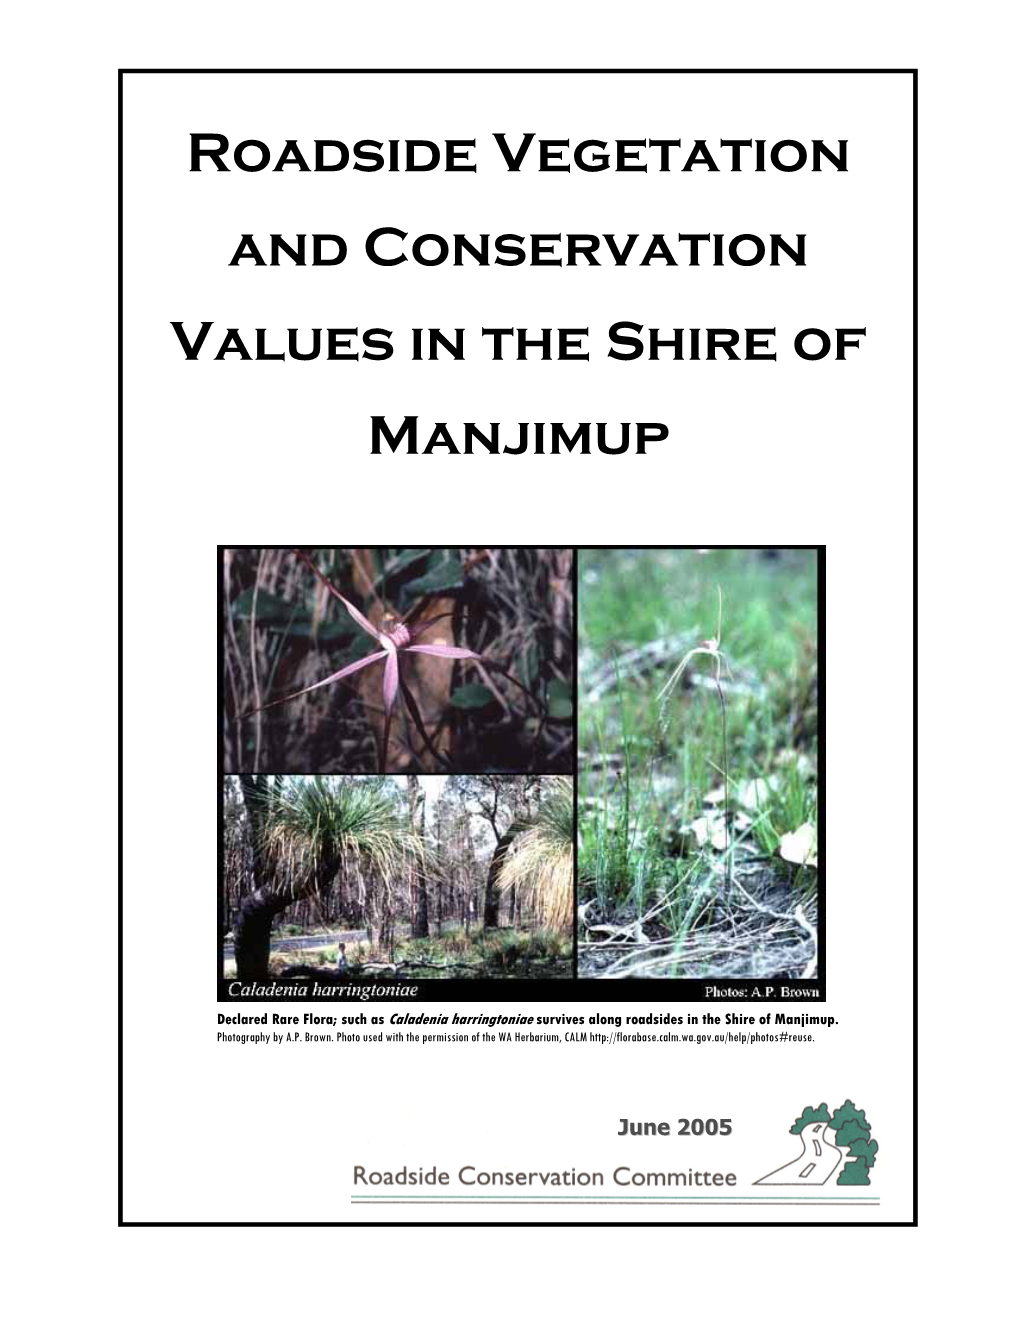 Roadside Vegetation and Conservation Values in the Shire of Manjimup